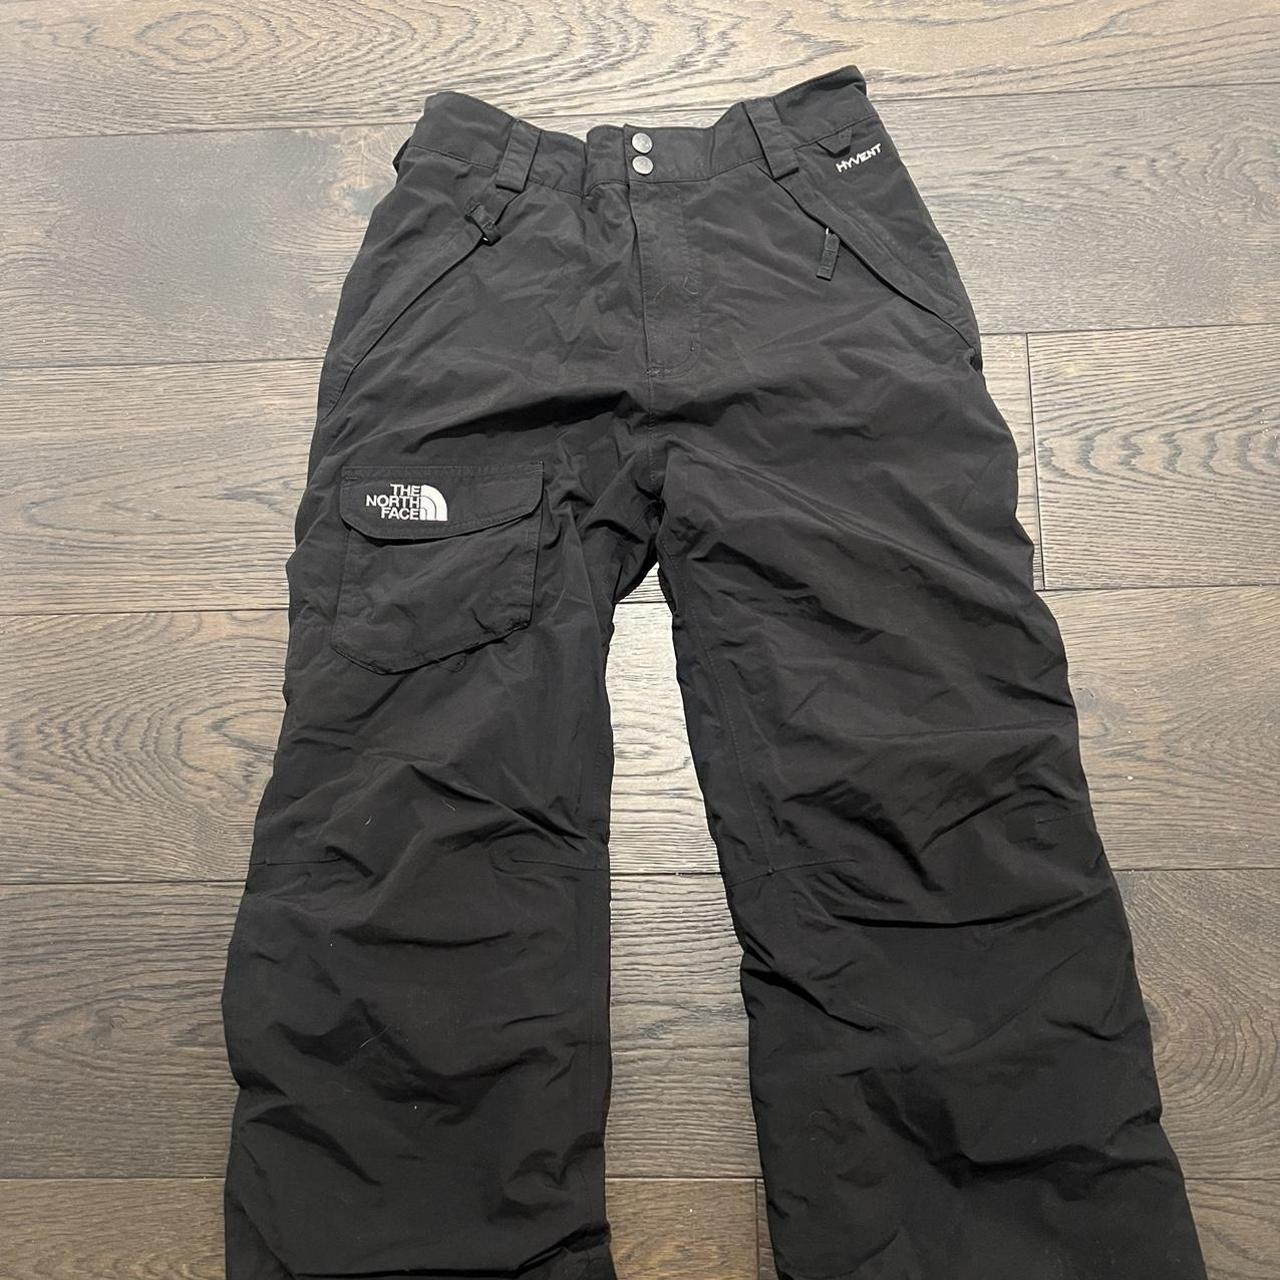 The North Face Trousers | Depop